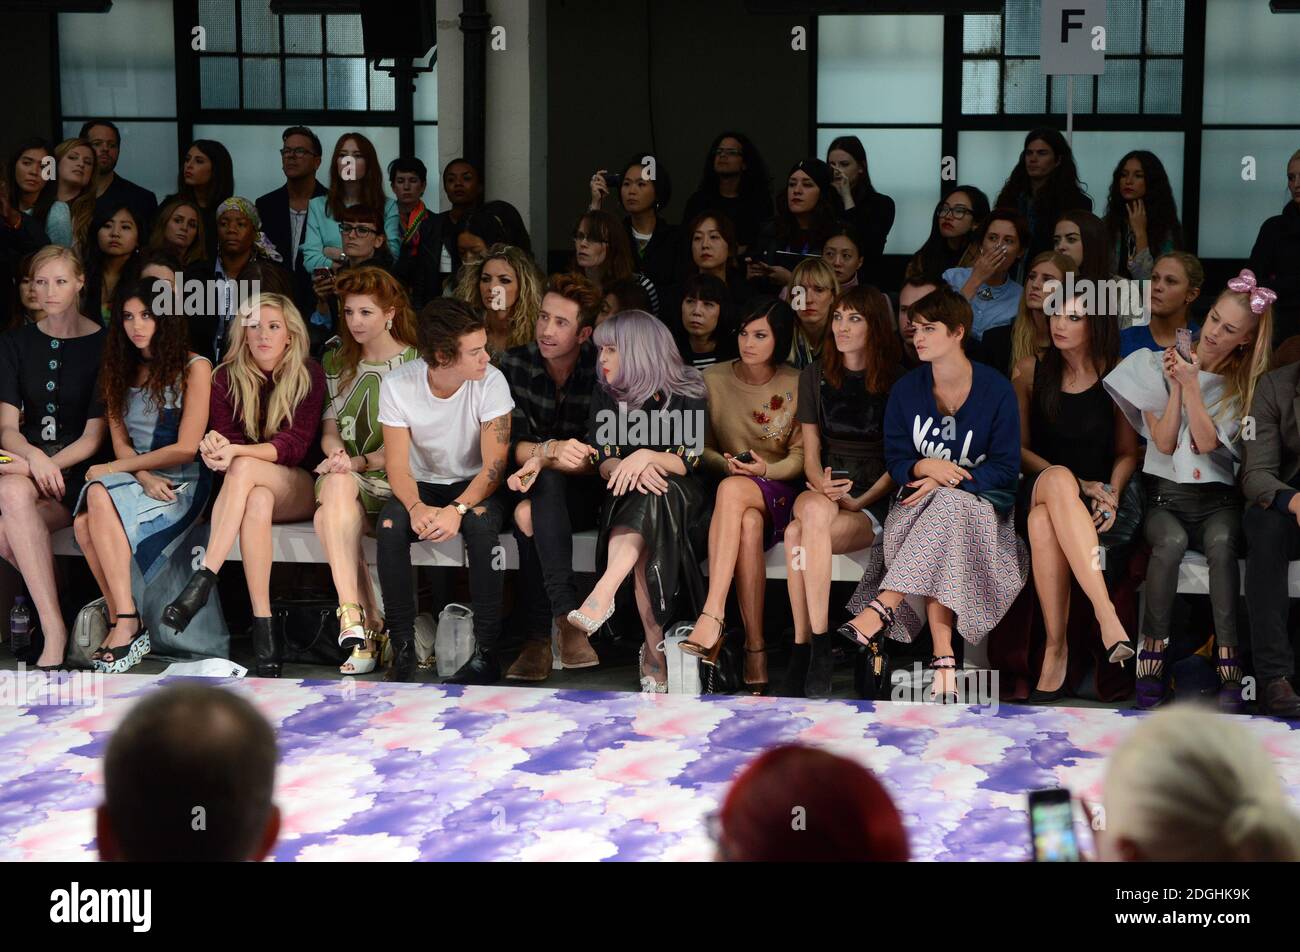 (Left to Right) Eliza Doolittle, Ellie Goulding, Nicola Roberts, Harry Styles, Nick Grimshaw, Kelly Osbourne, Leigh Lezark, Alexa Chung, Pixie Geldof and Daisy Lowe at the House of Holland Catwalk Show Catwalk Show, part of London Fashion Week, Spring Summer 2014, Goldsmiths Hall.   Stock Photo